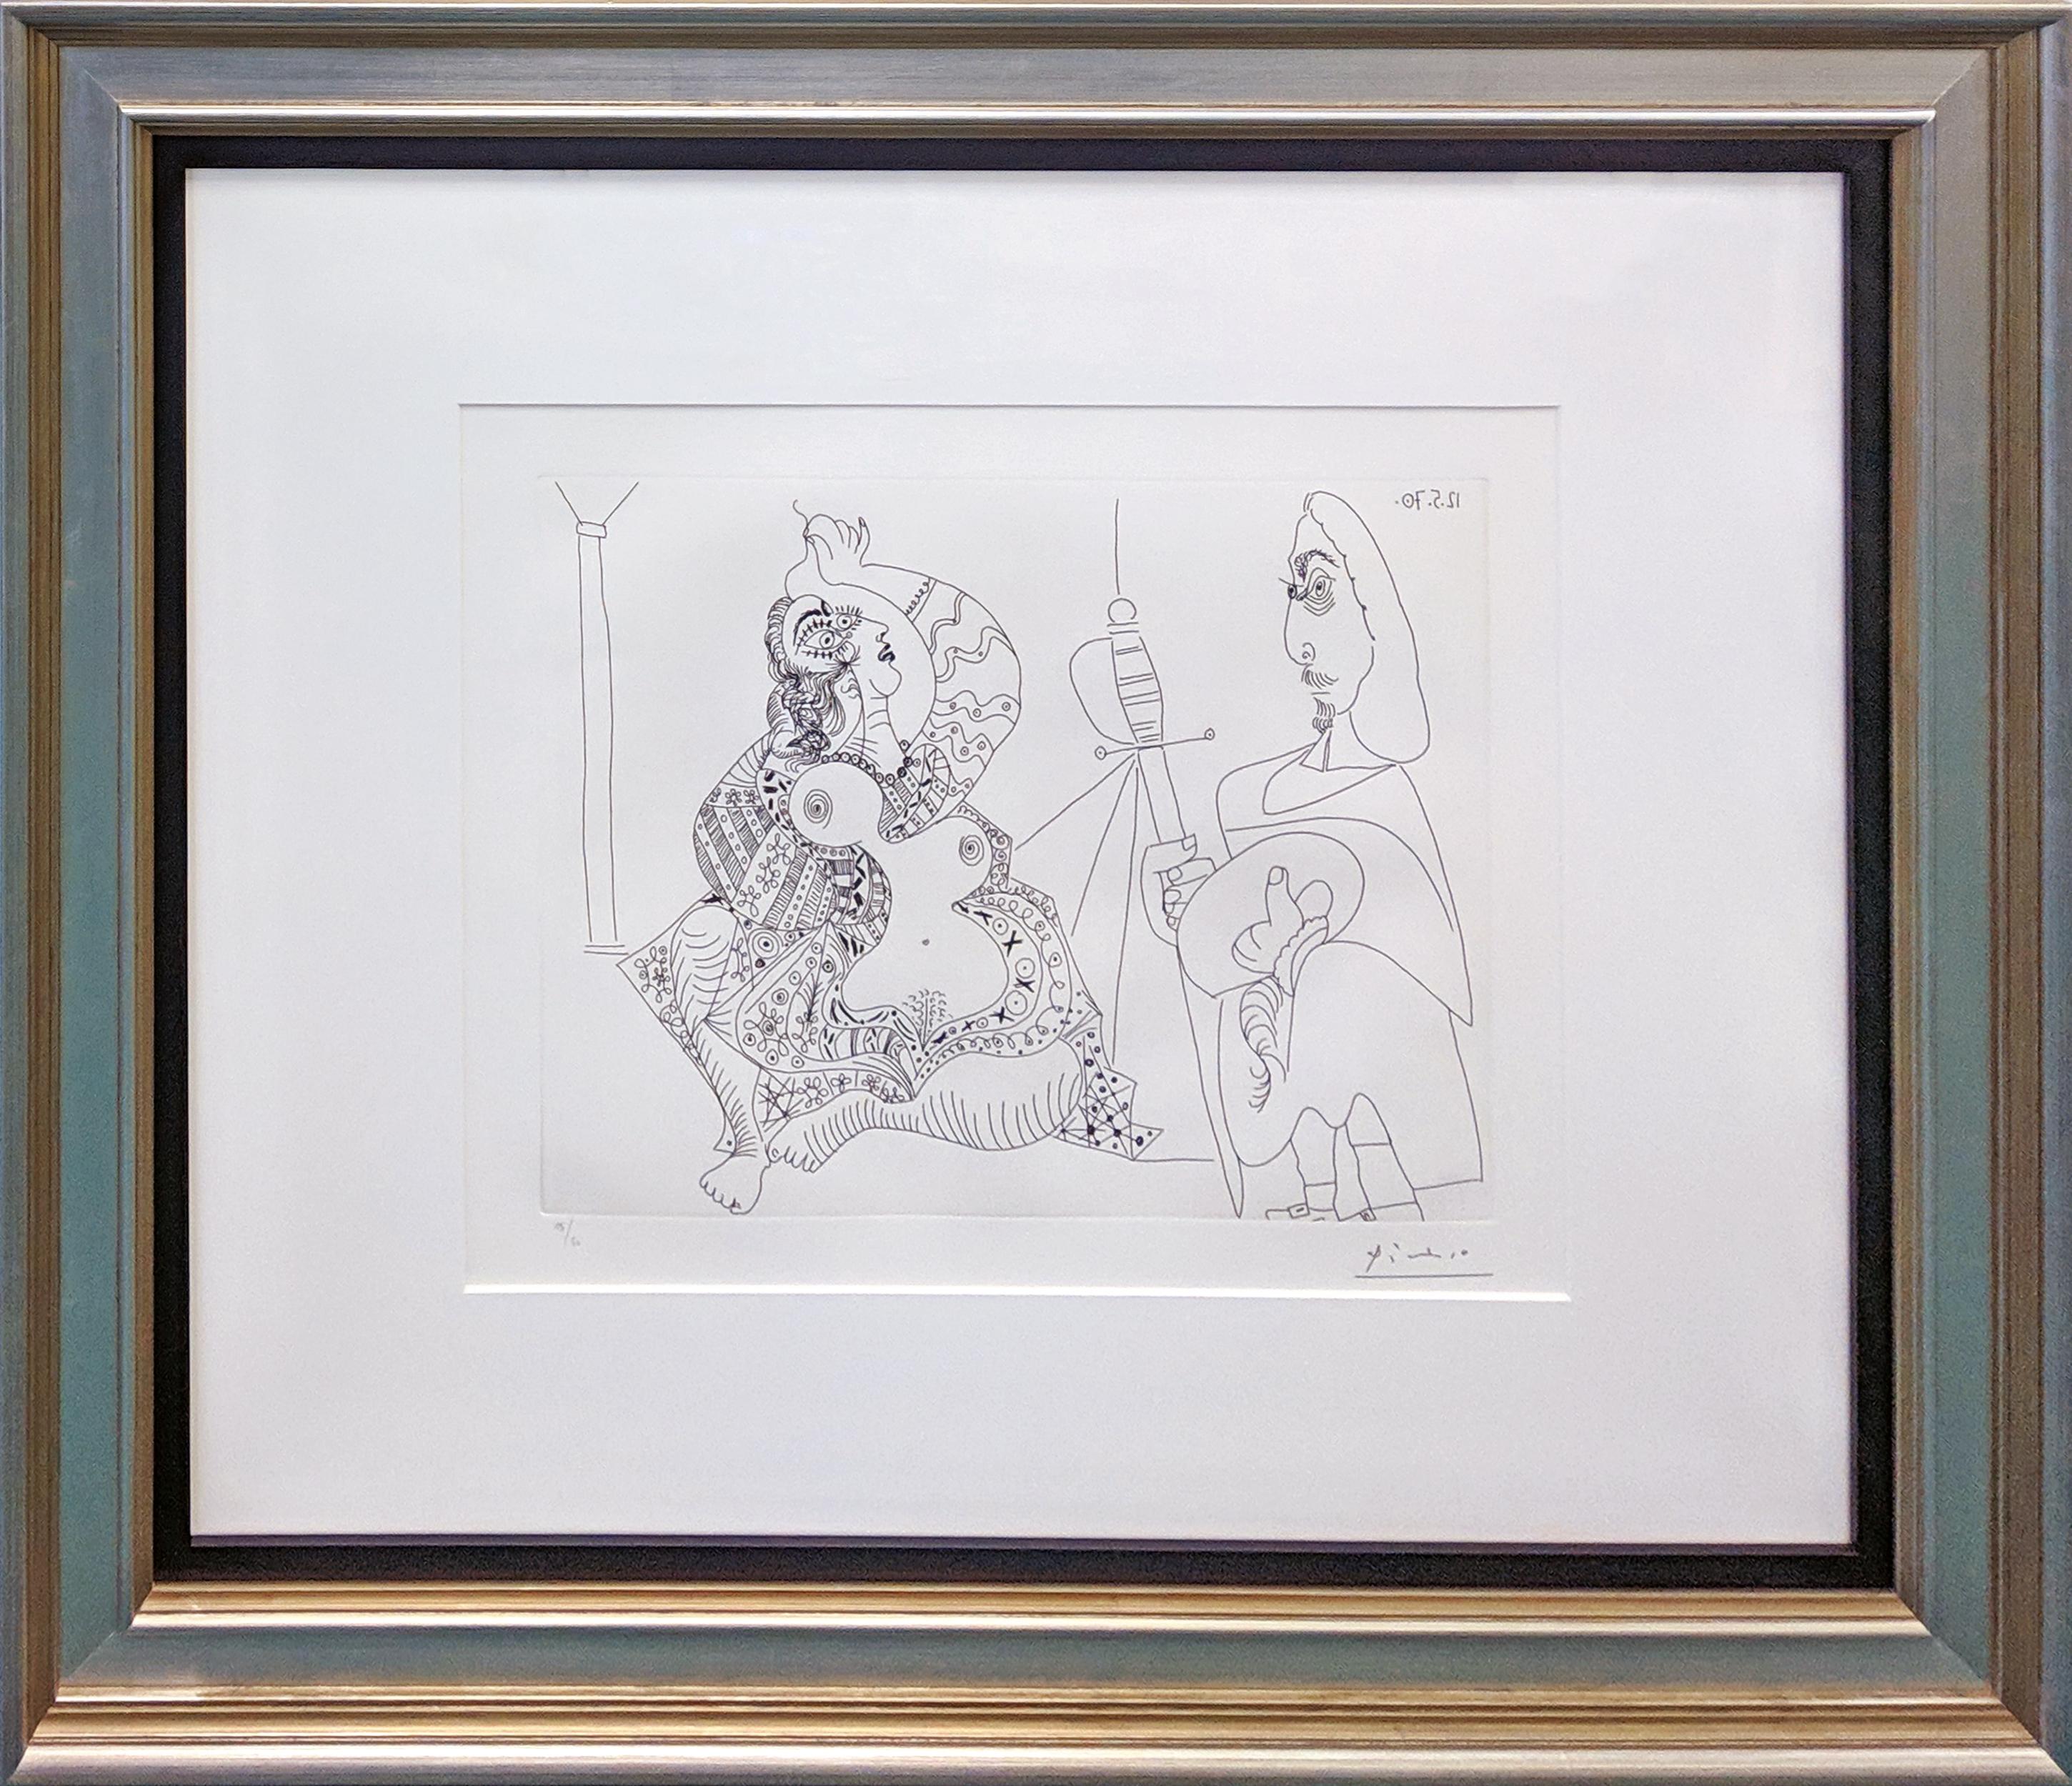 MOUSQUETAIRE ET ODALISQUE, MEDUSE, PLATE 47 FROM SERIES 156 (BLOCH 1902) - Print by Pablo Picasso